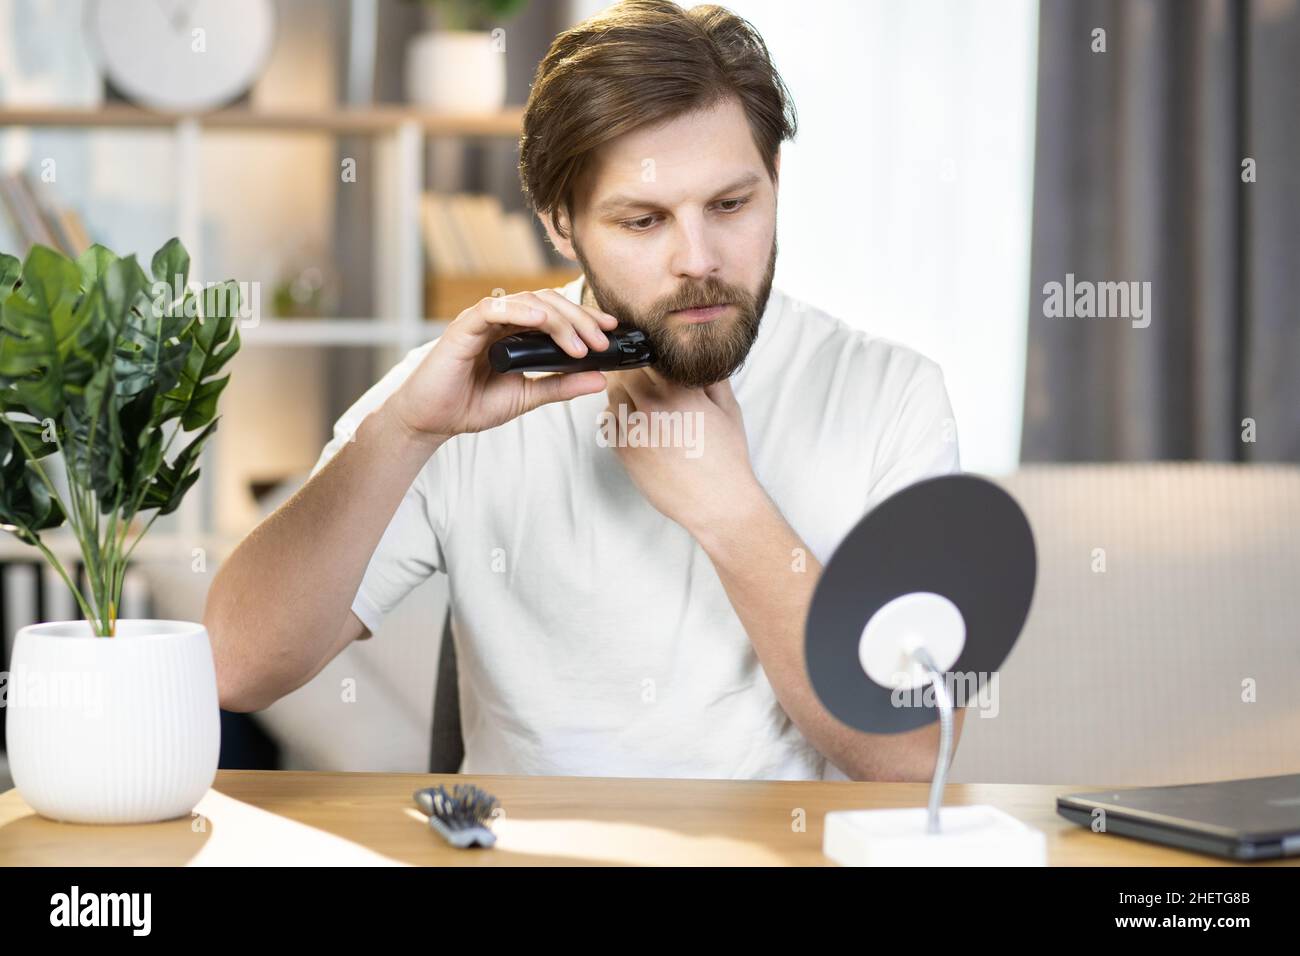 Young handsome caucasian man performs hygienic procedures at home. The bearded guy tidies up his beard while shaving it with an electric razor Stock Photo